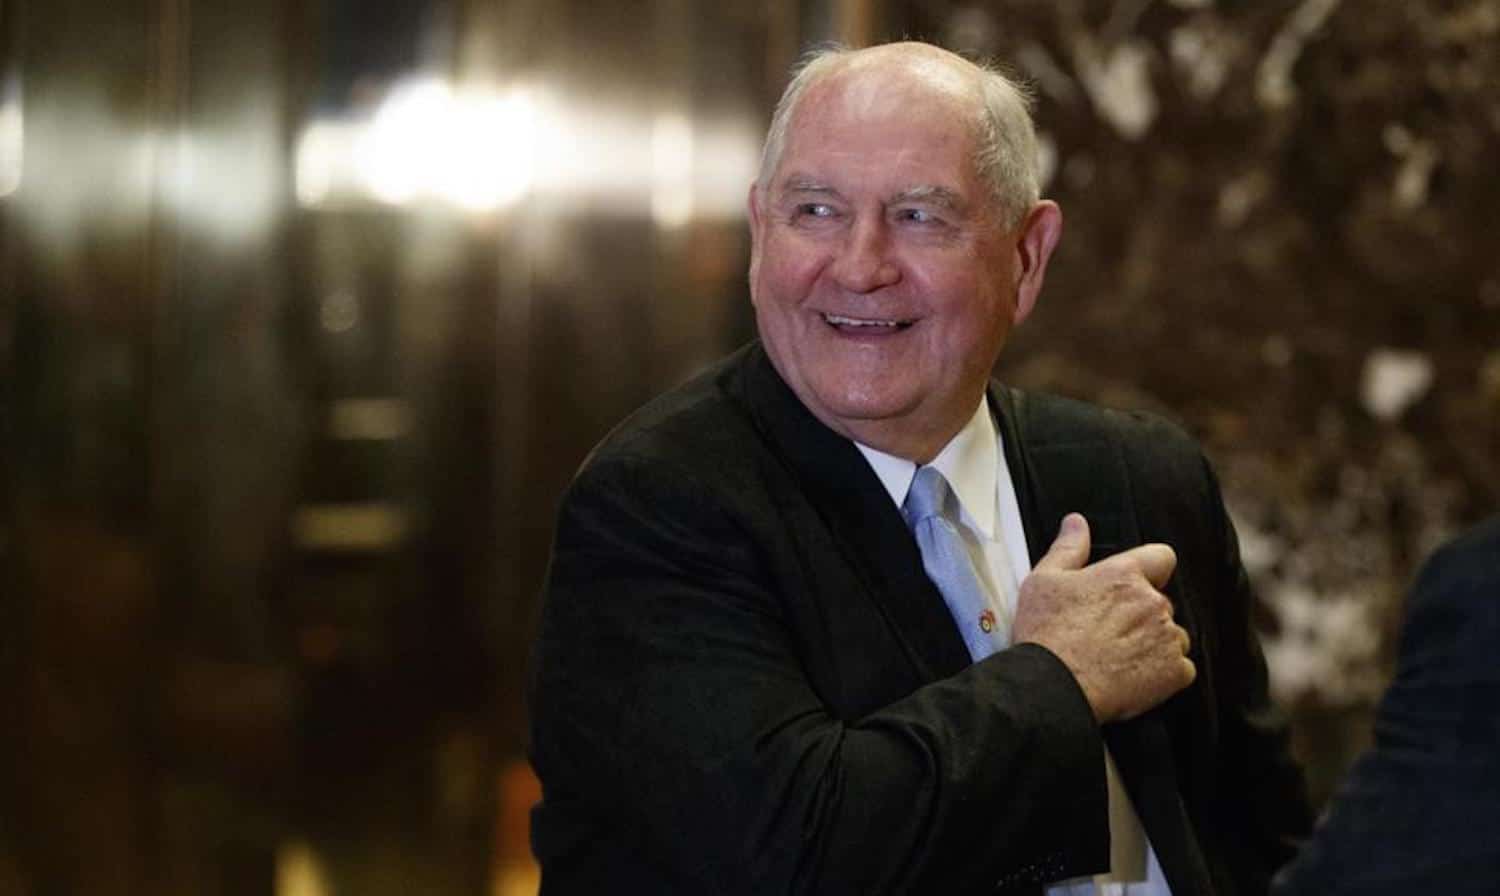 Sonny Perdue is President-elect Trump's Nominee for Secretary of Agriculture